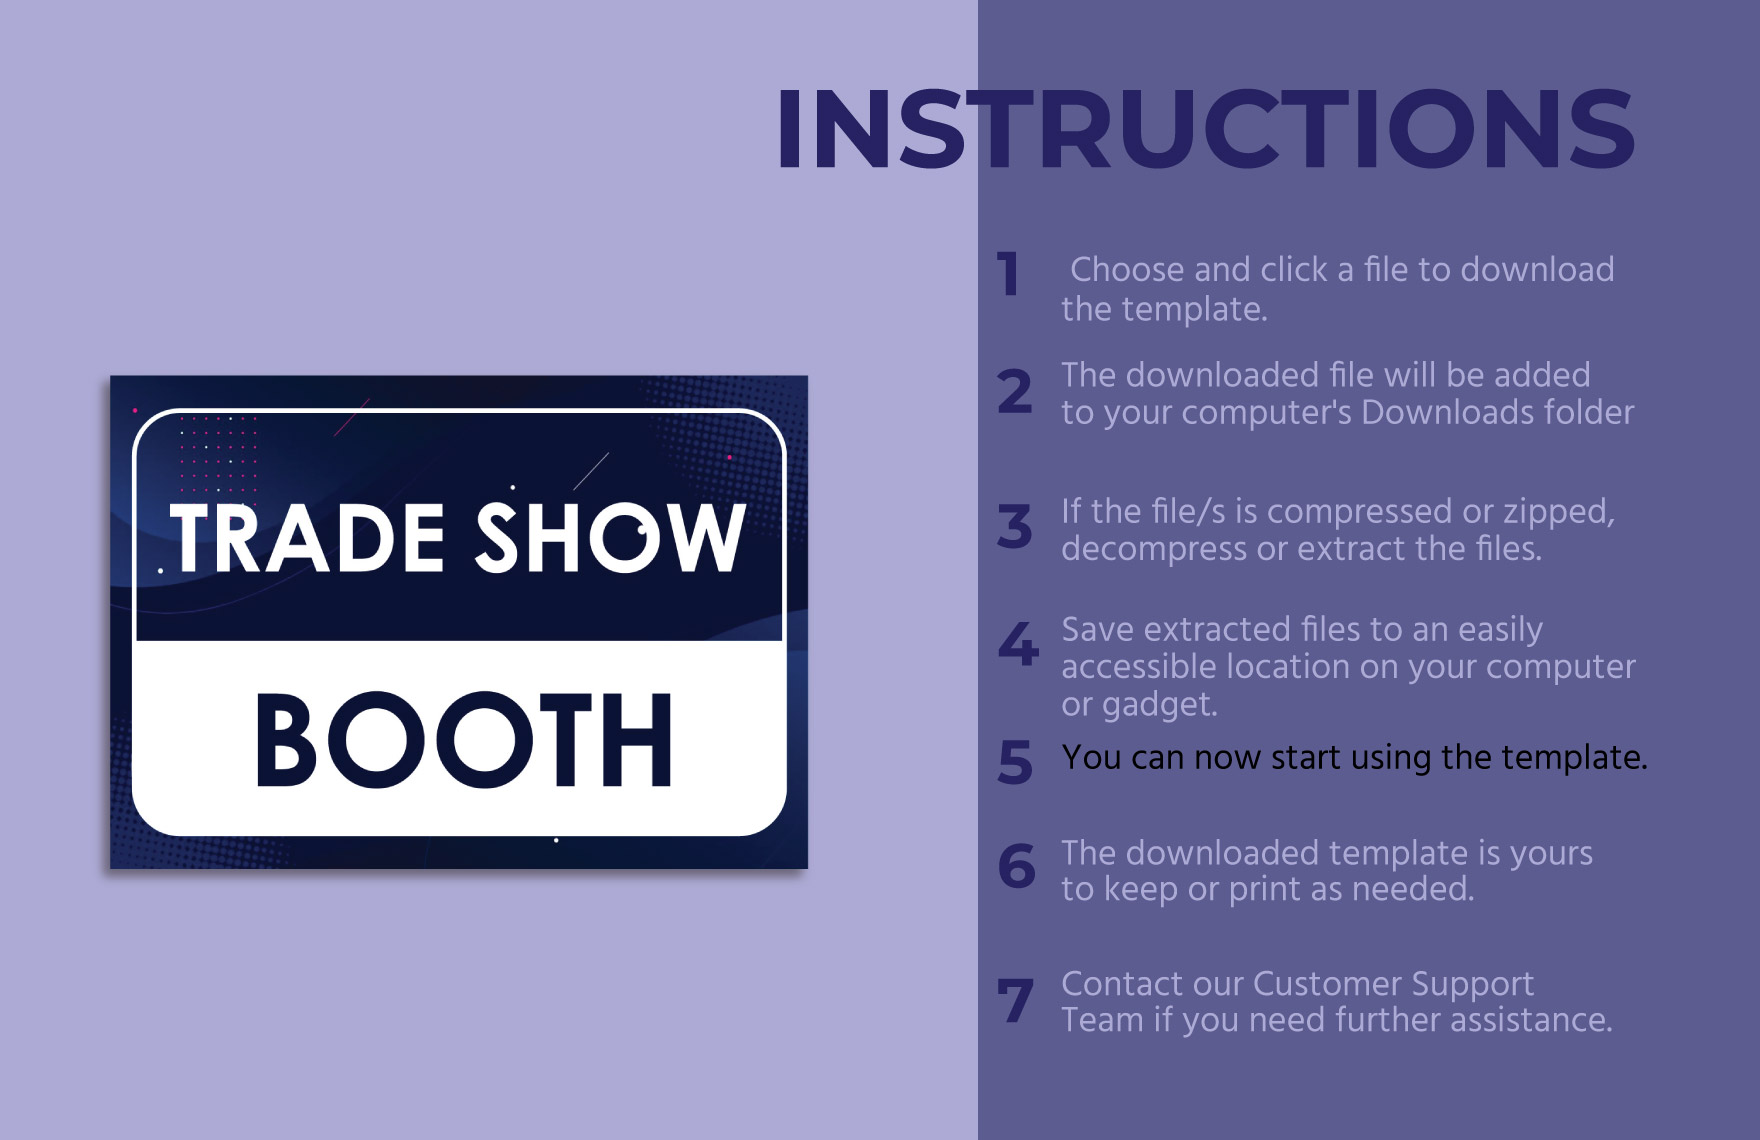 Trade Show Booth Marketing Sign Template